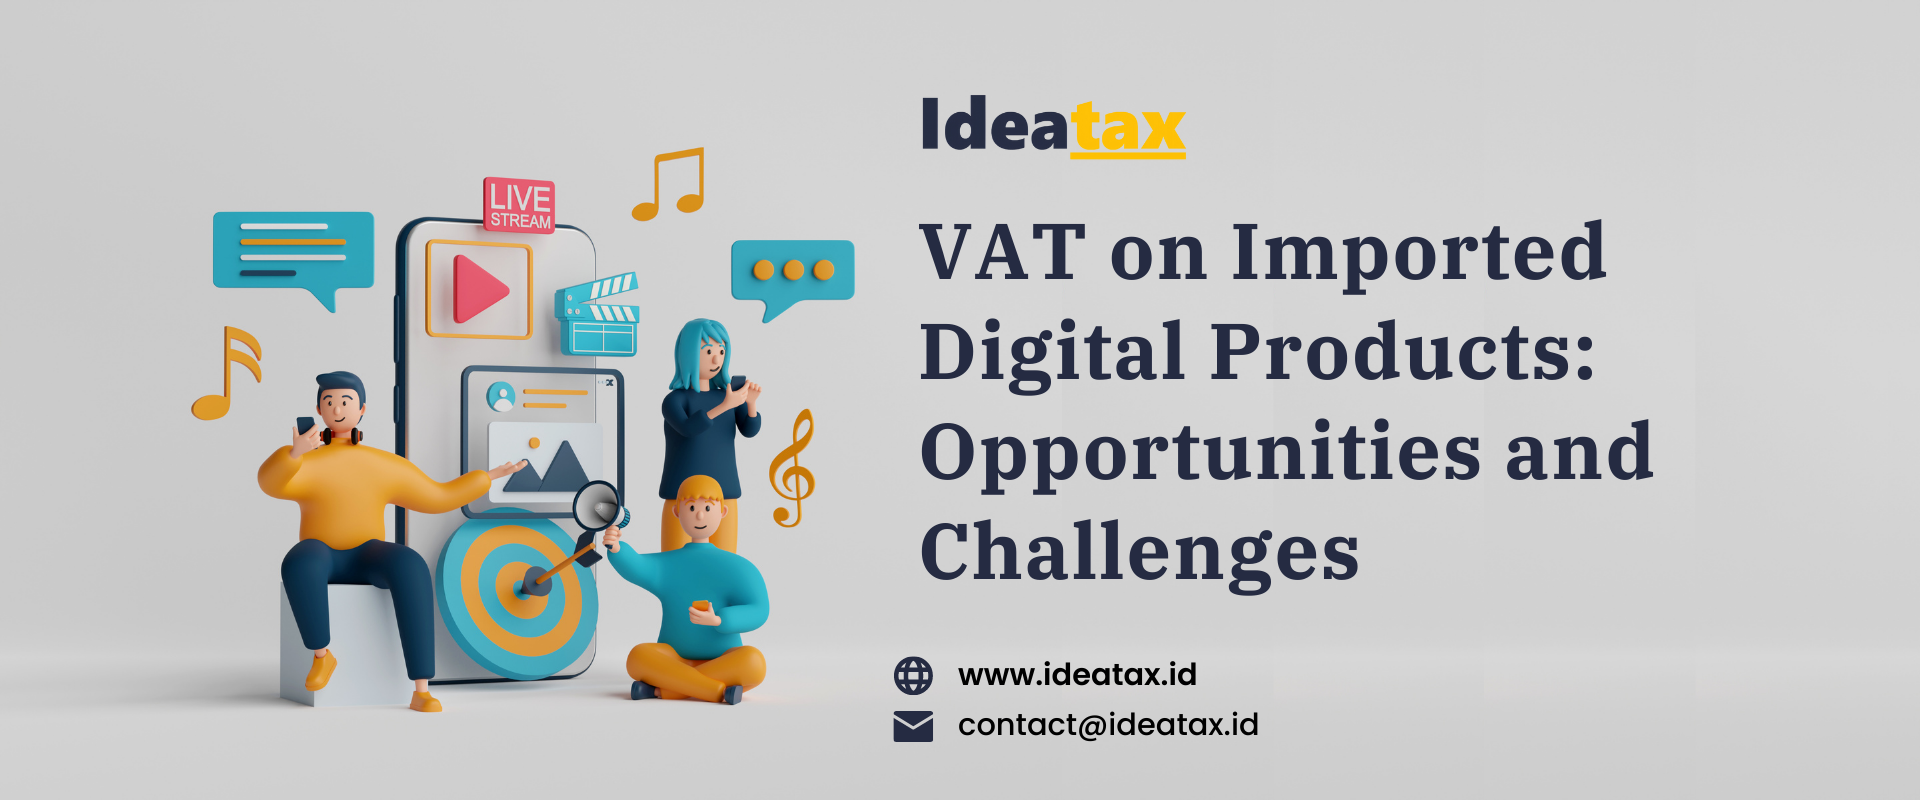 VAT on Imported Digital Products: Opportunities and Challenges